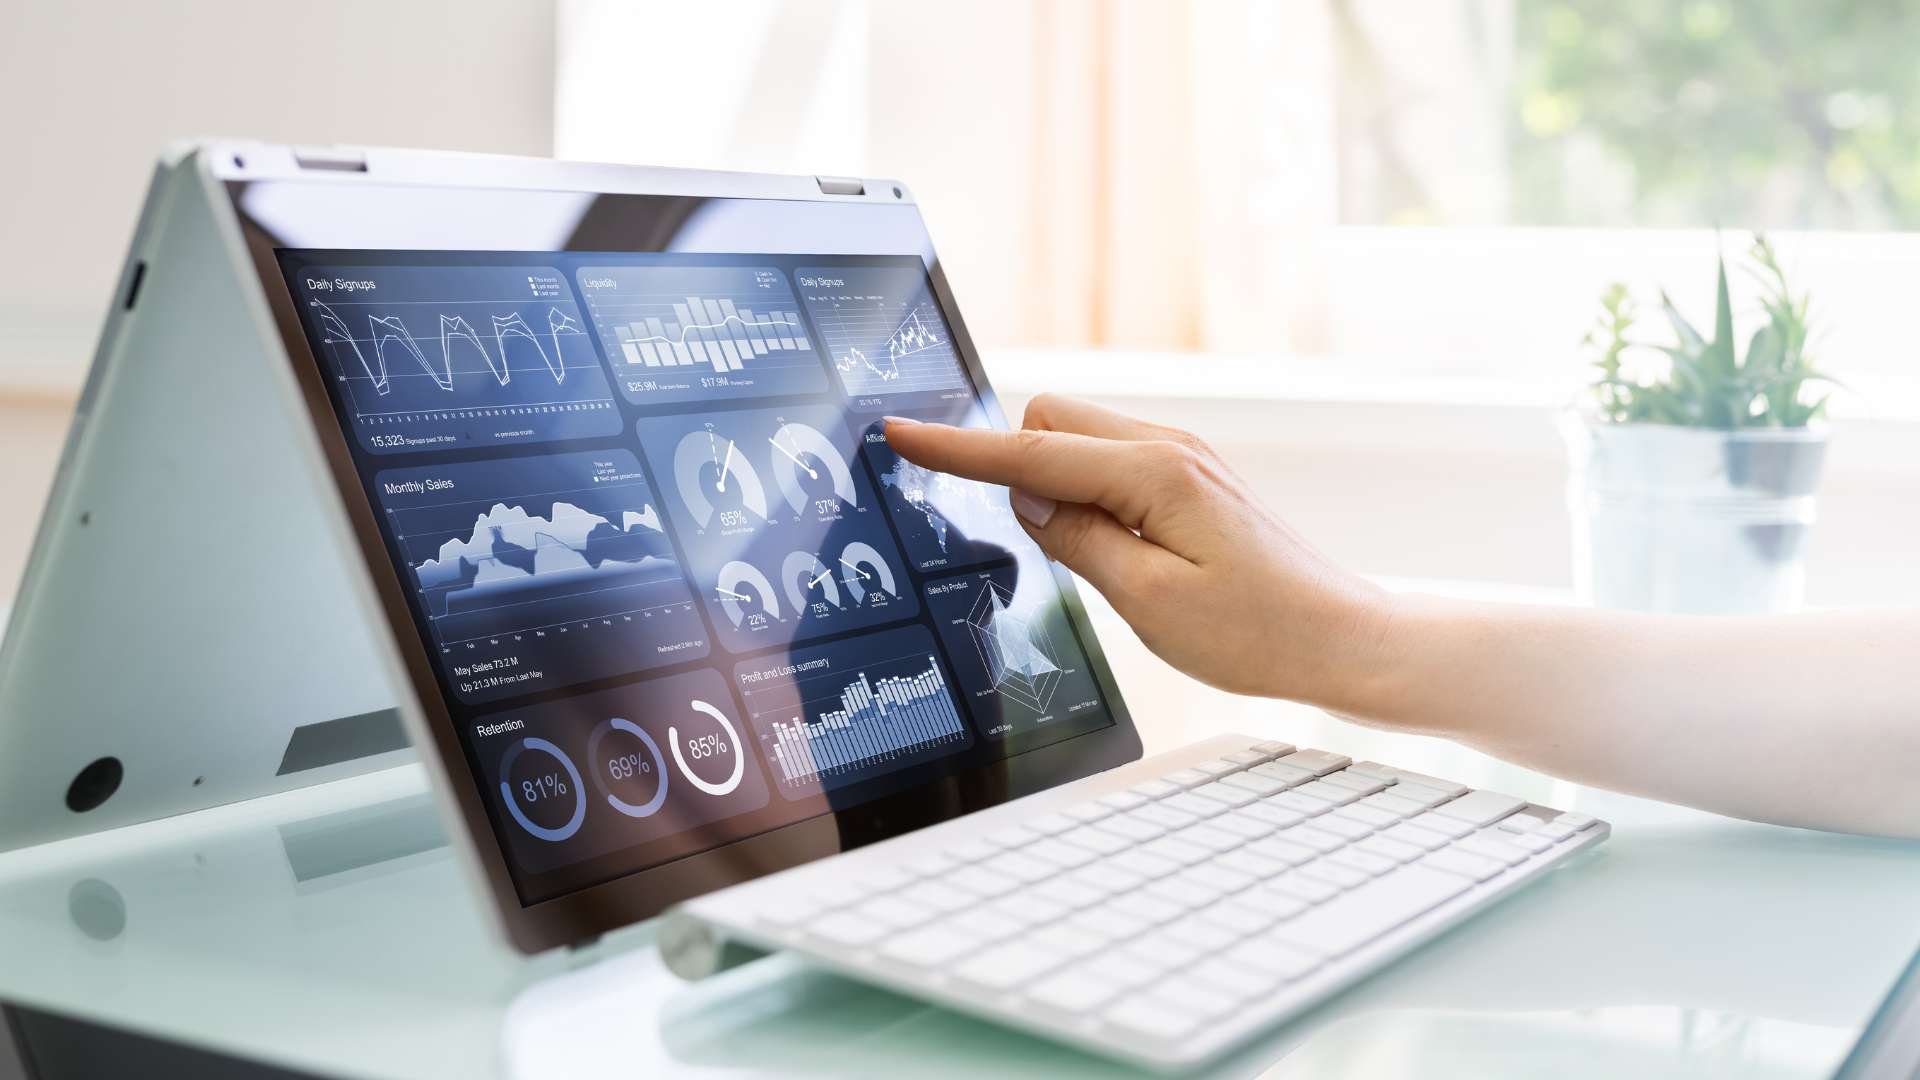 Person using a touchscreen to navigate cutting-edge business analytics, highlighting Fluid IT's focus on equipping companies with the latest technology solutions.